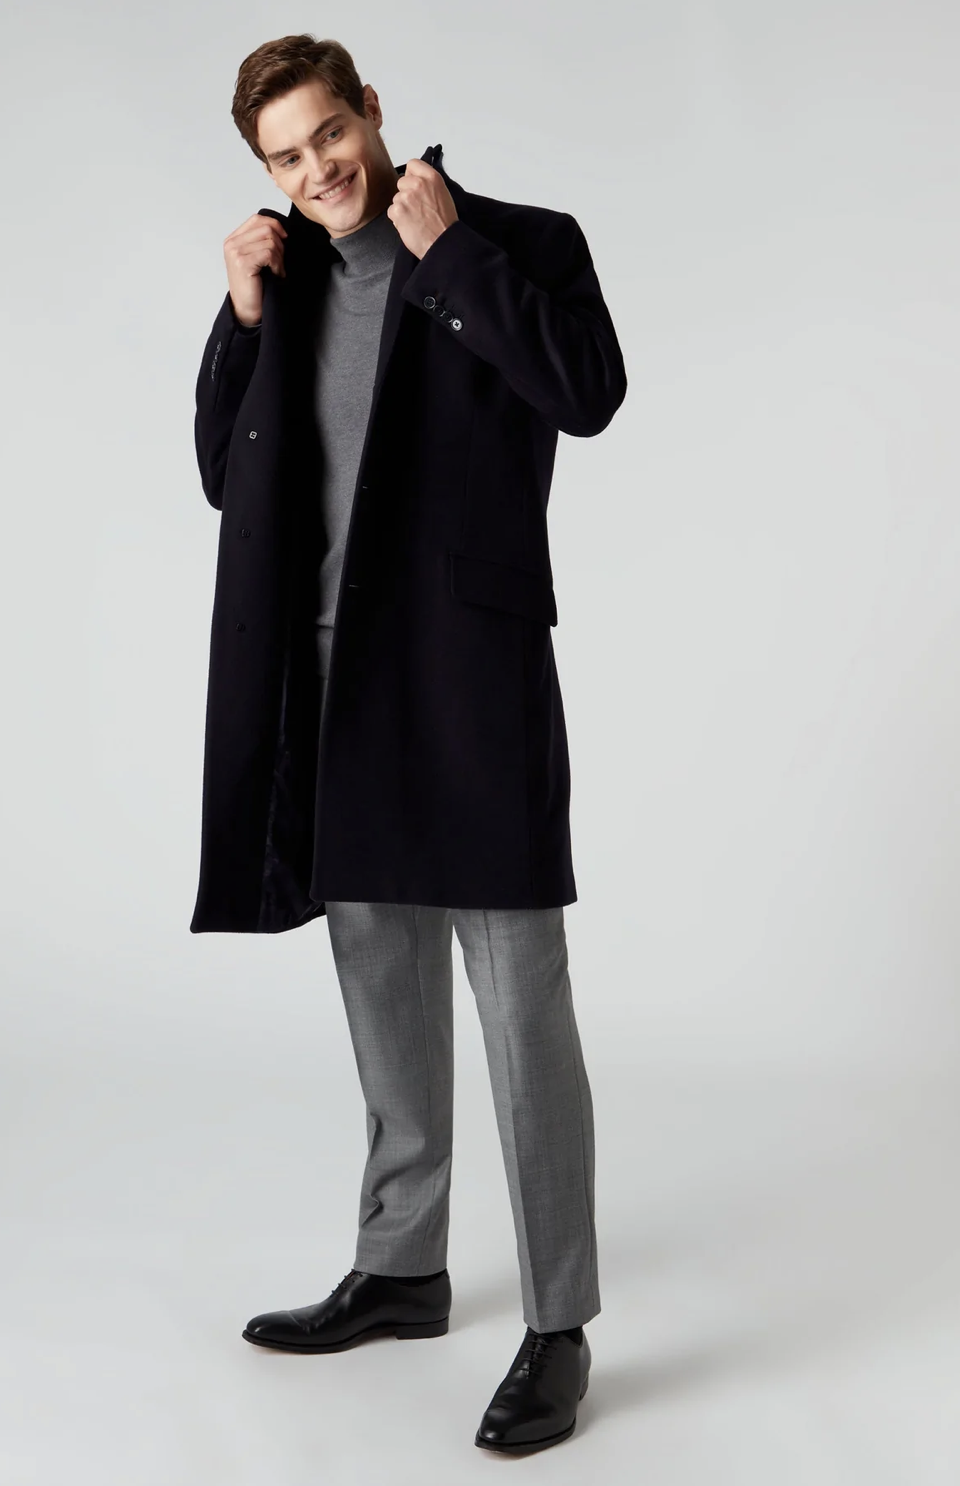 A universal coat that can go from your Big to Work